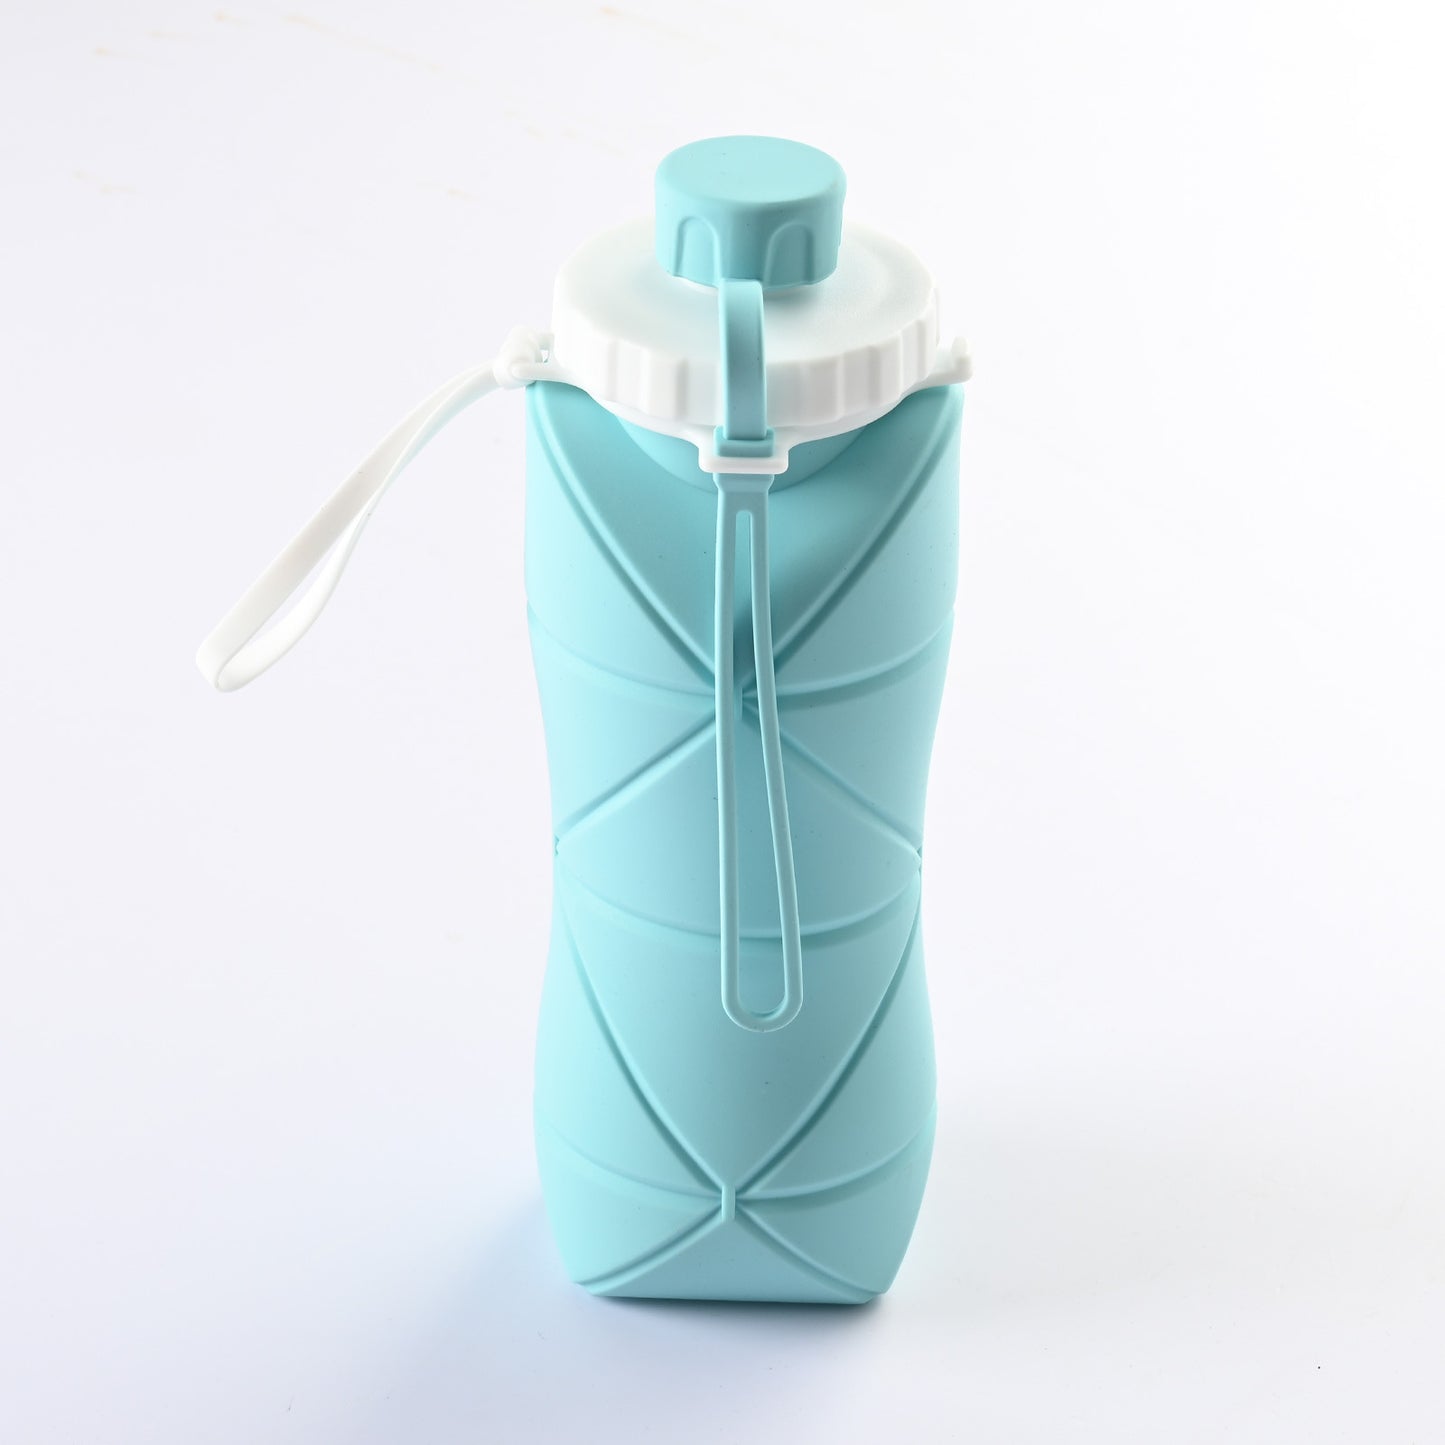 600ml Eco-Friendly Folding Silicone Water Bottle - Leak-Proof, Compact & Stylish for Sports, Travel, and Outdoor Adventures